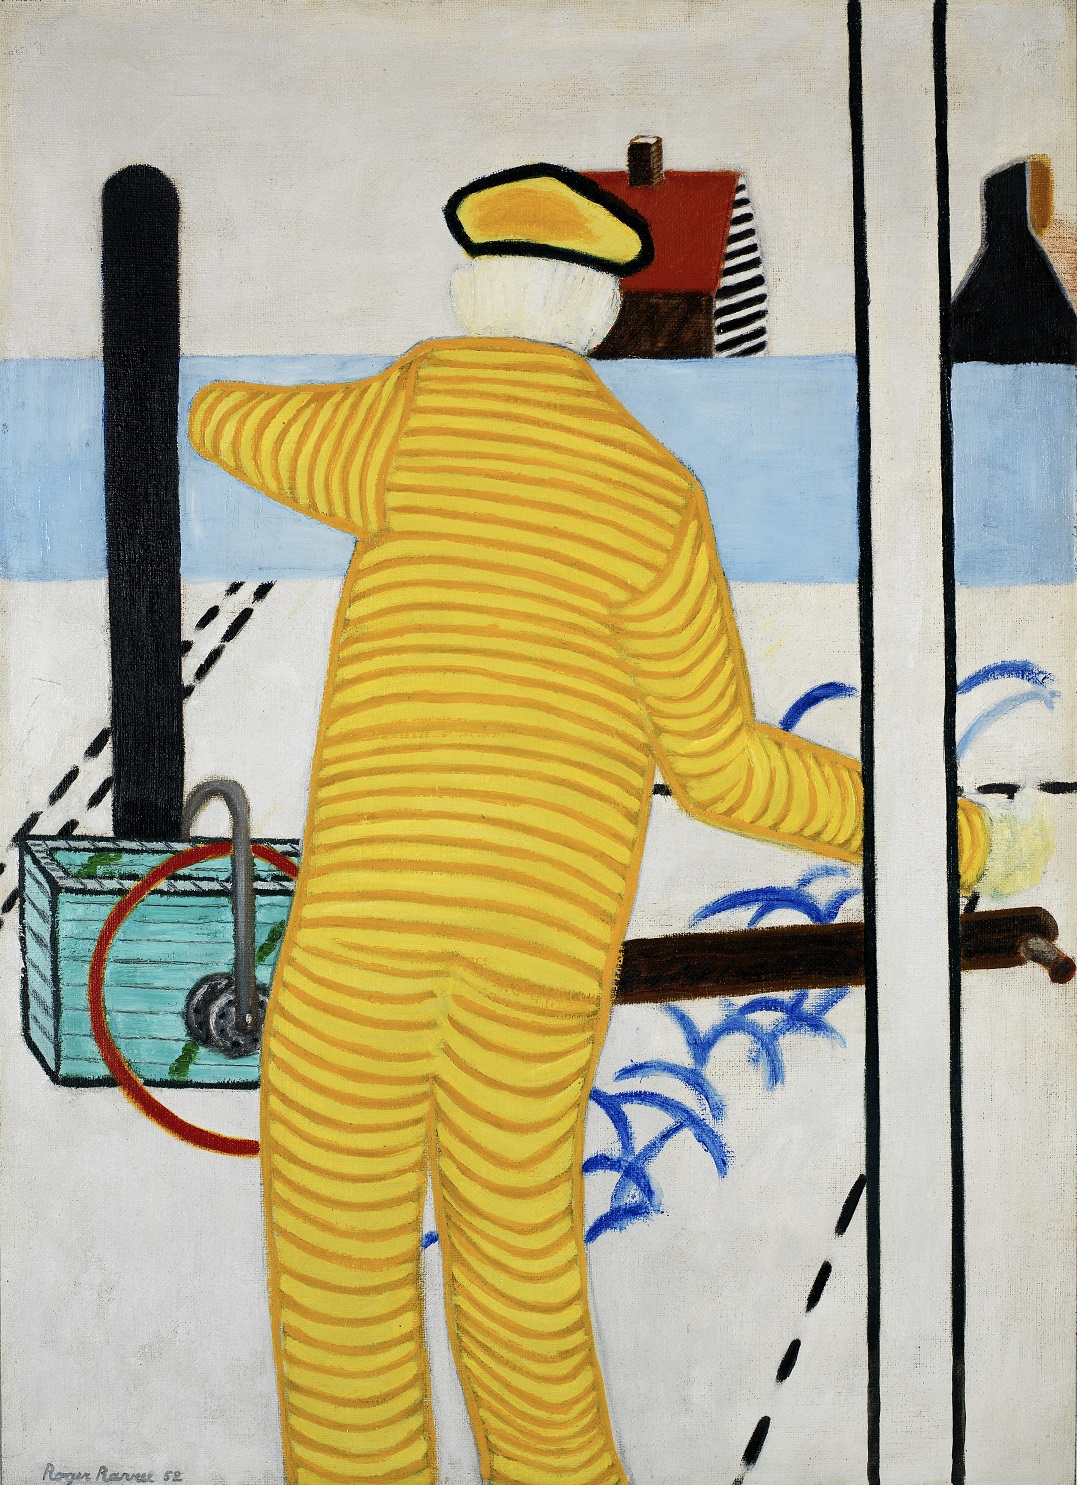 ‘Yellow Man with Cart’, a painting by Roger Raveel from 1952